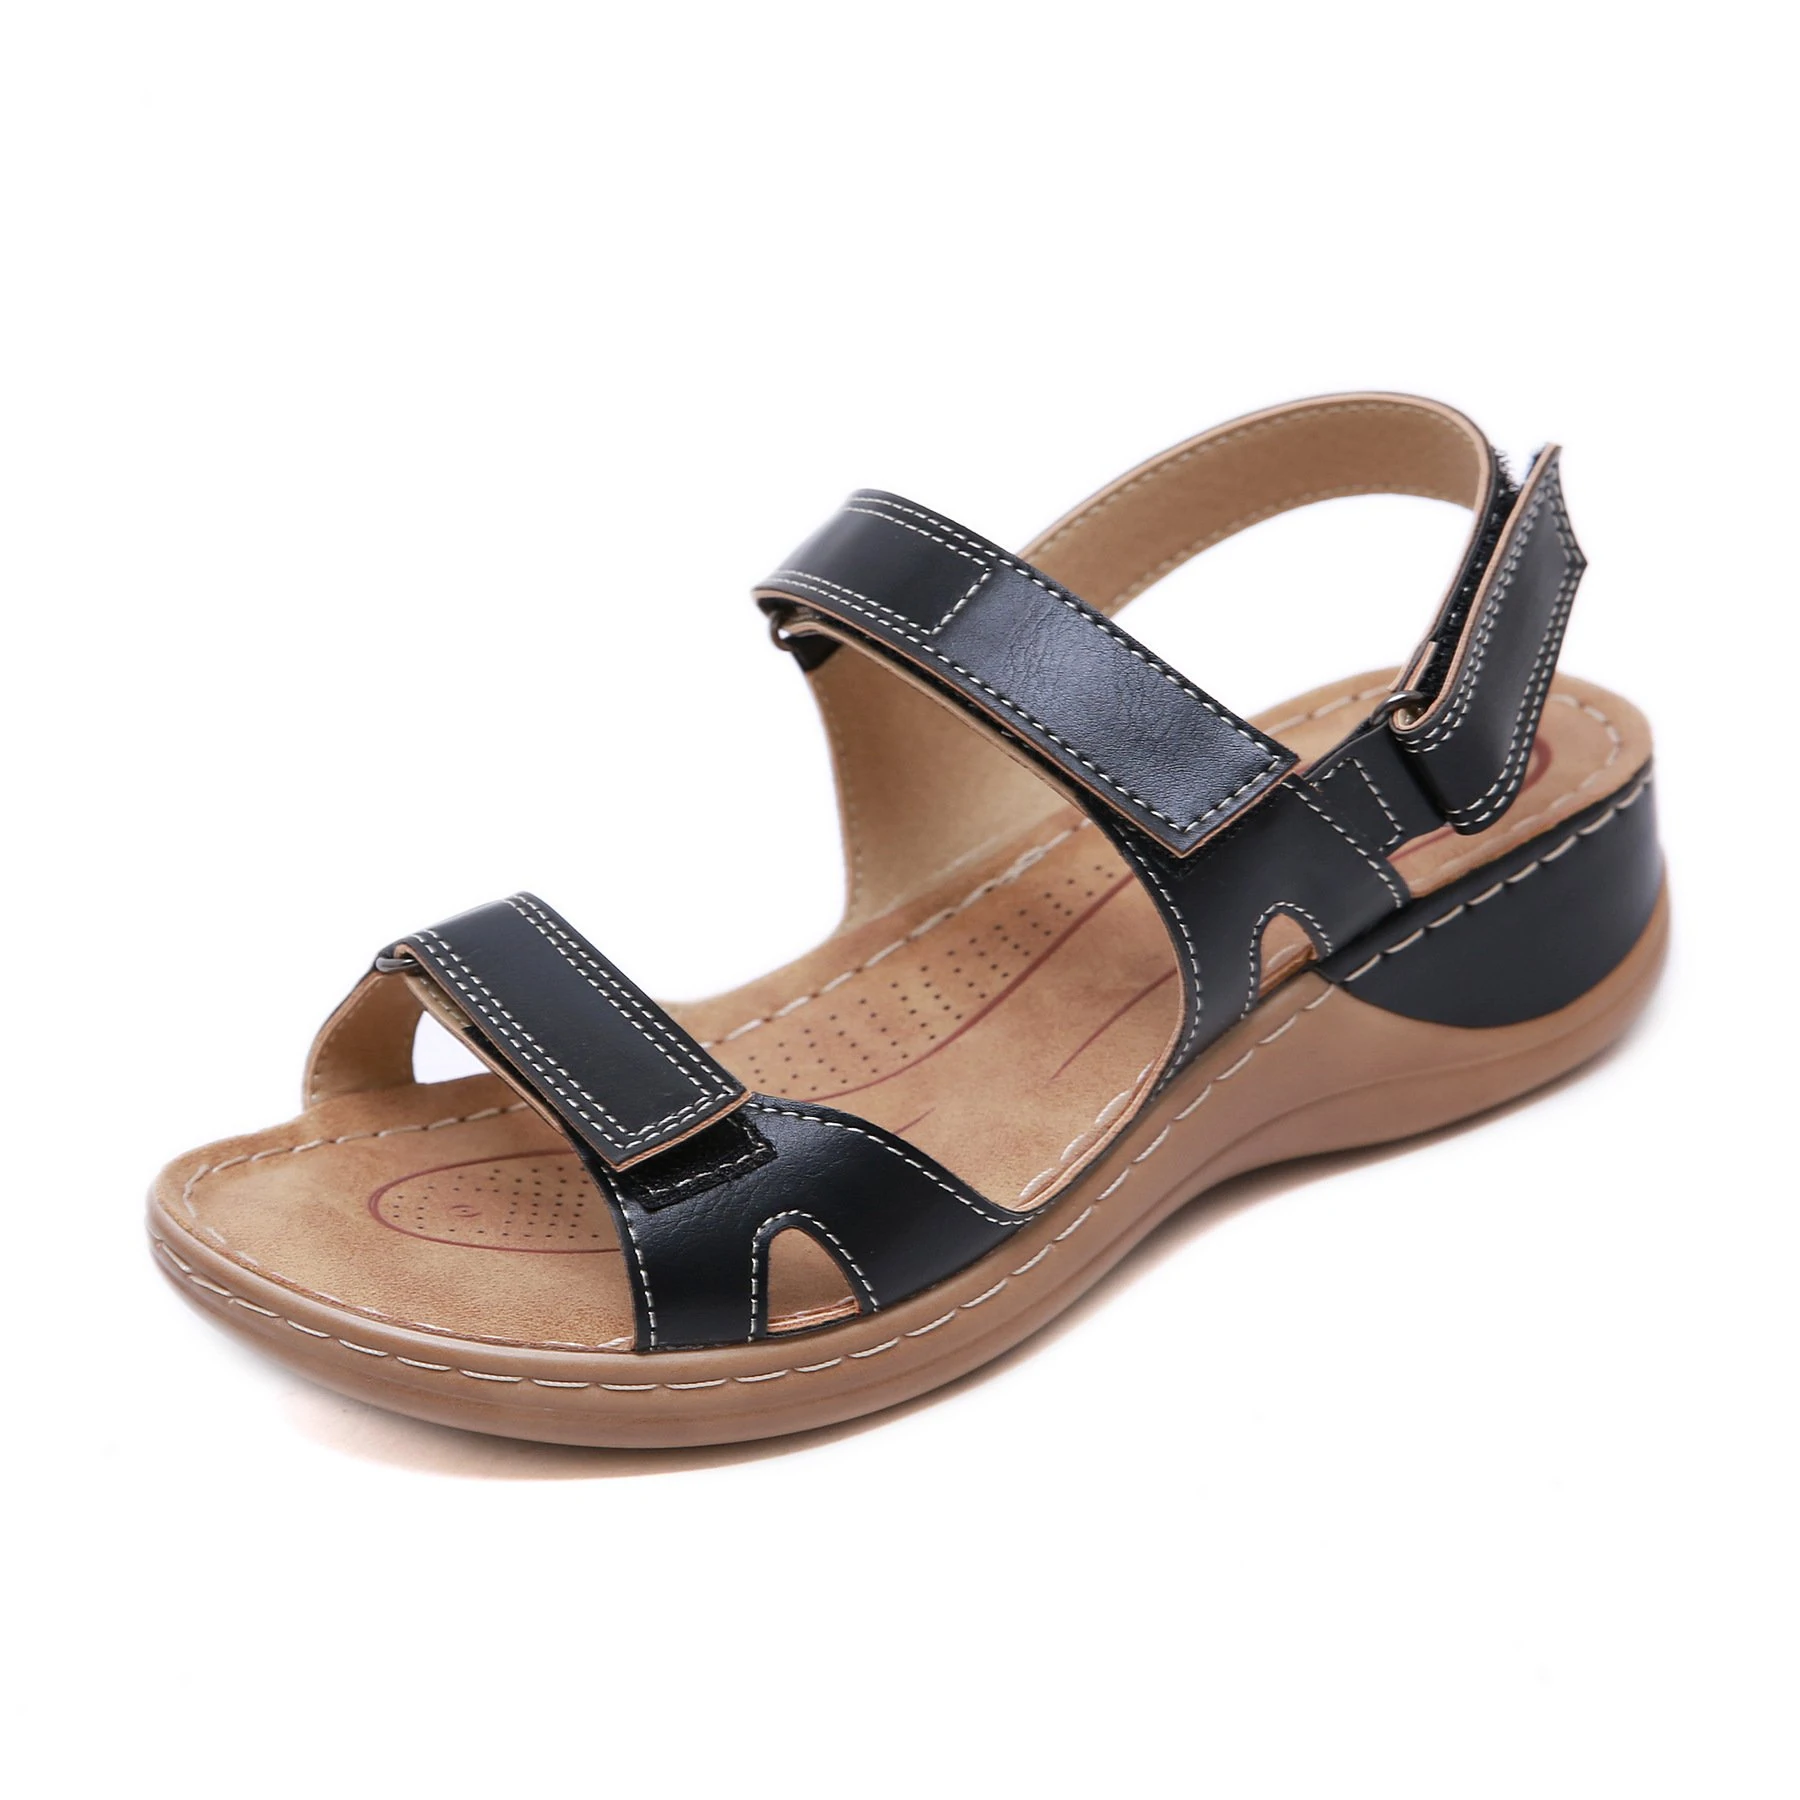 sursell womens comfy orthotic sandalsp8ygw